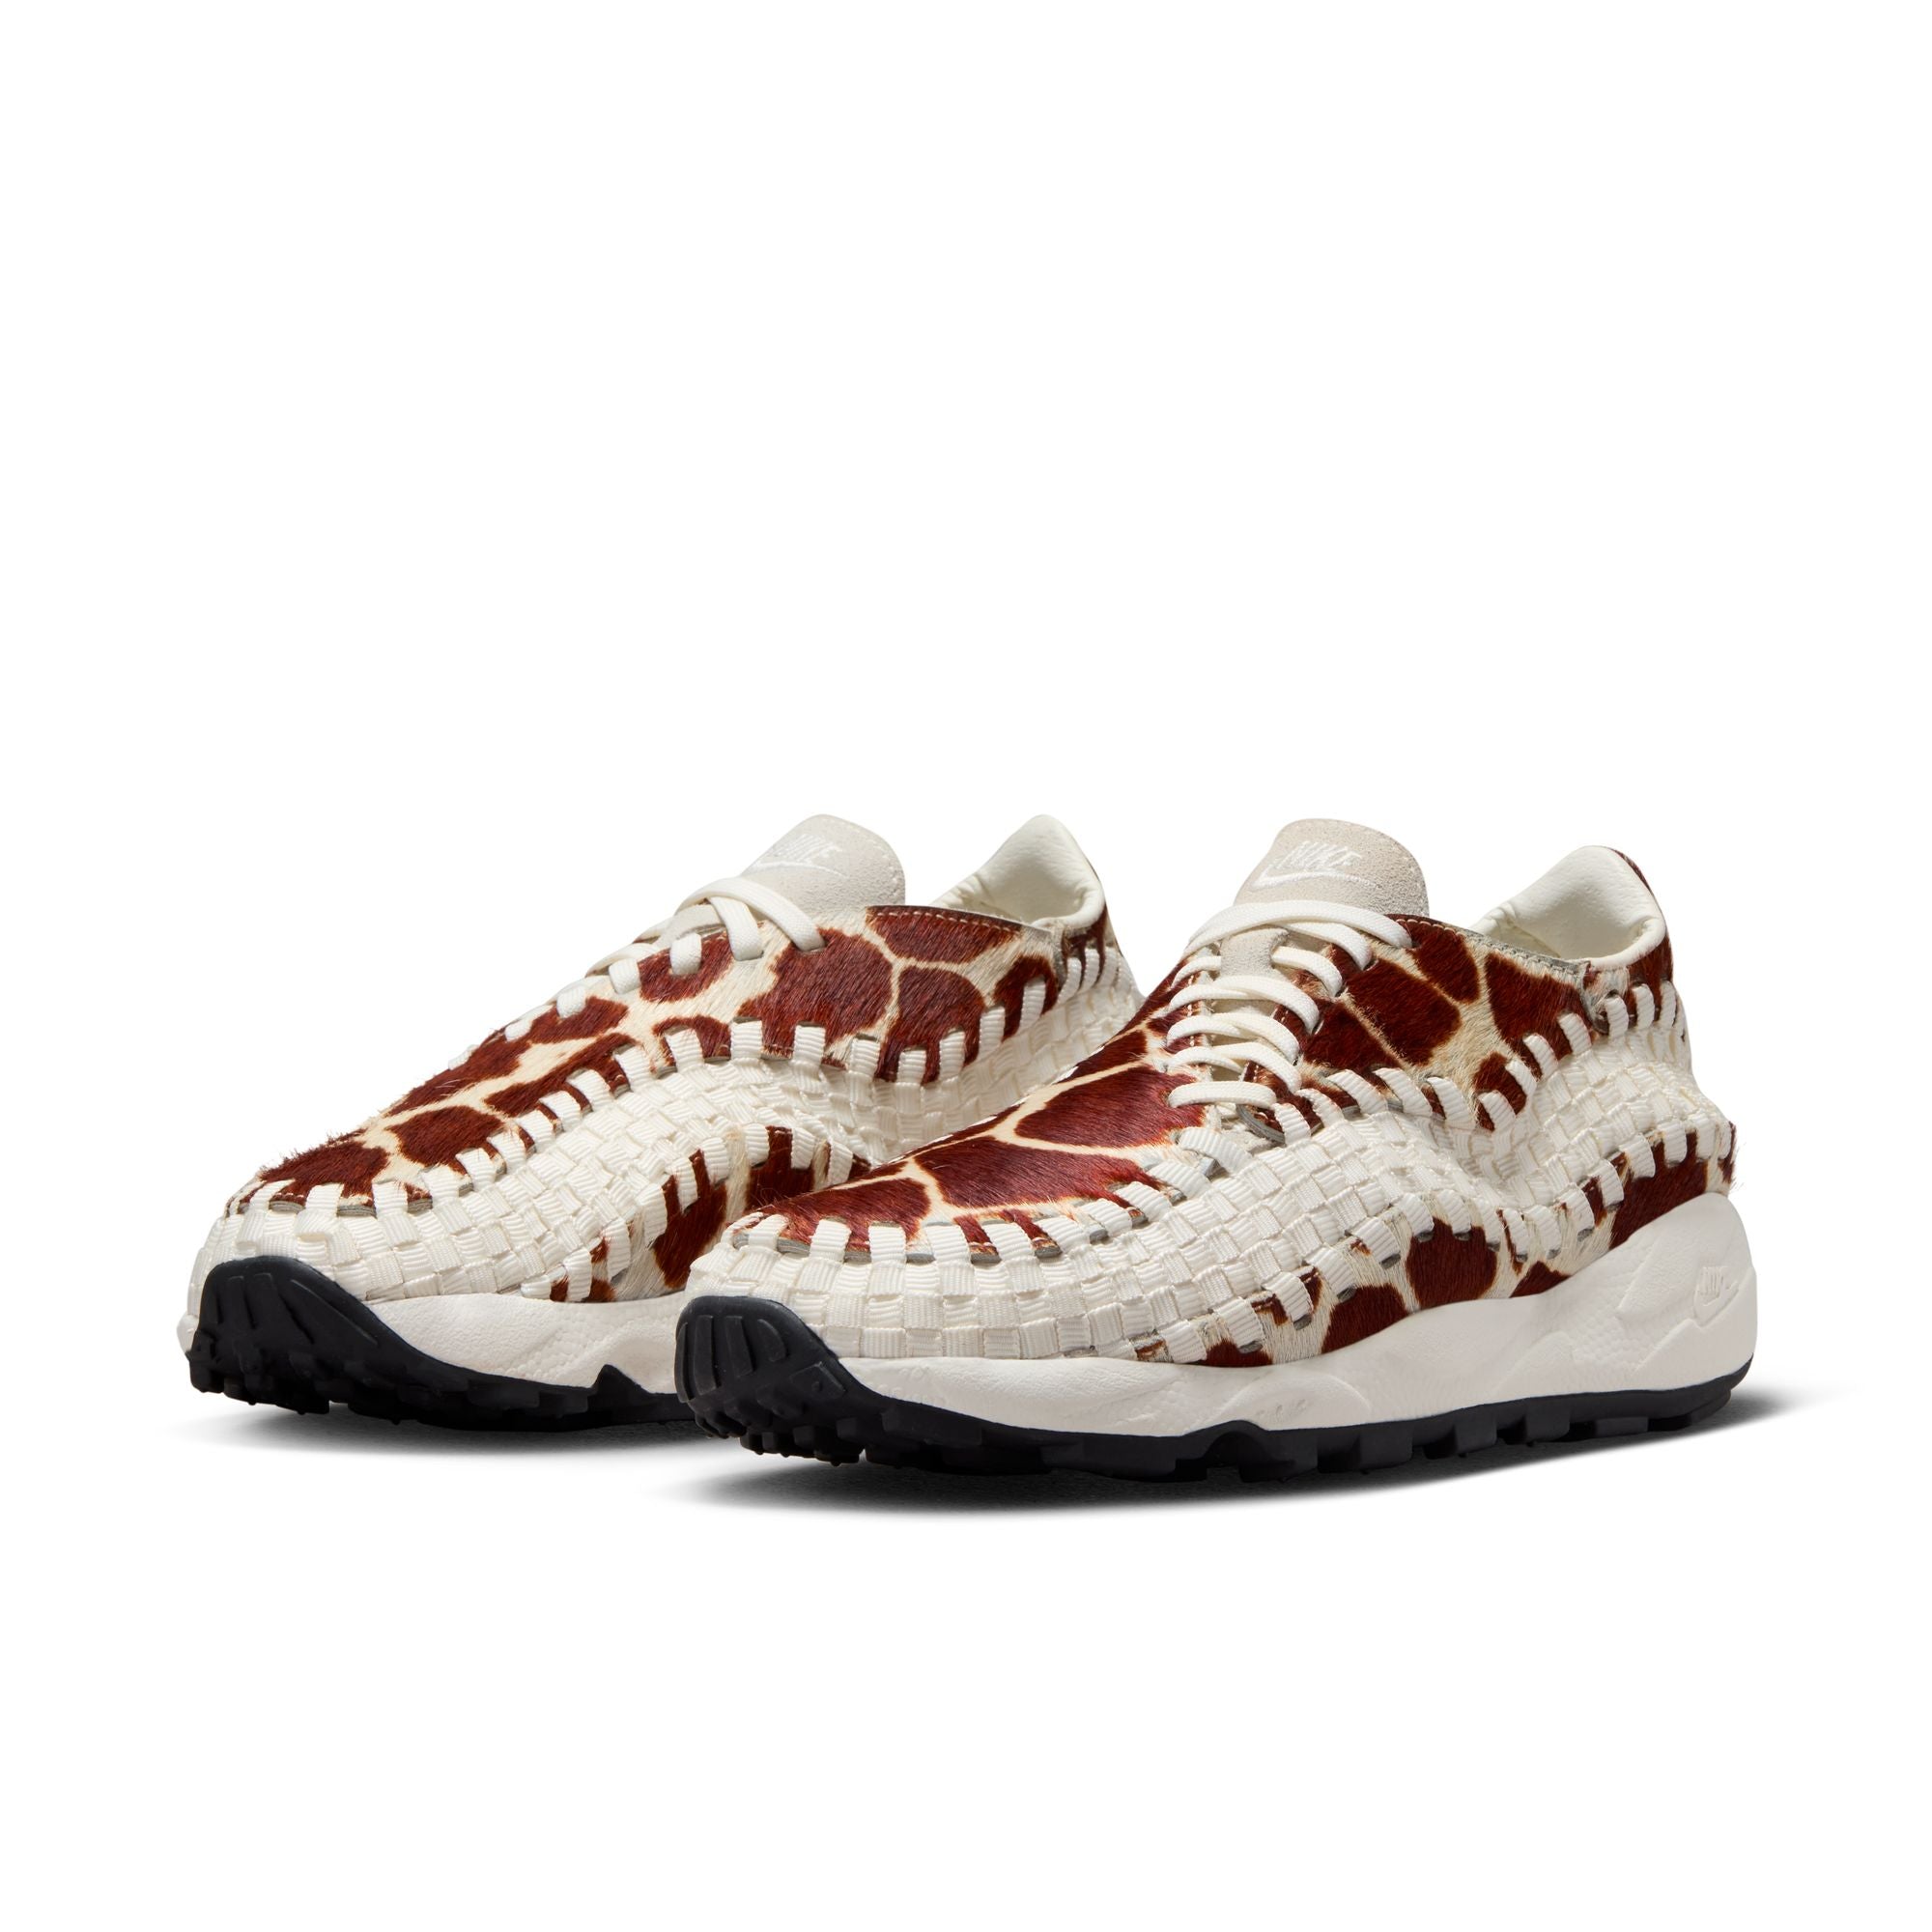 WMNS Nike Air Footscape Woven - SoleFly